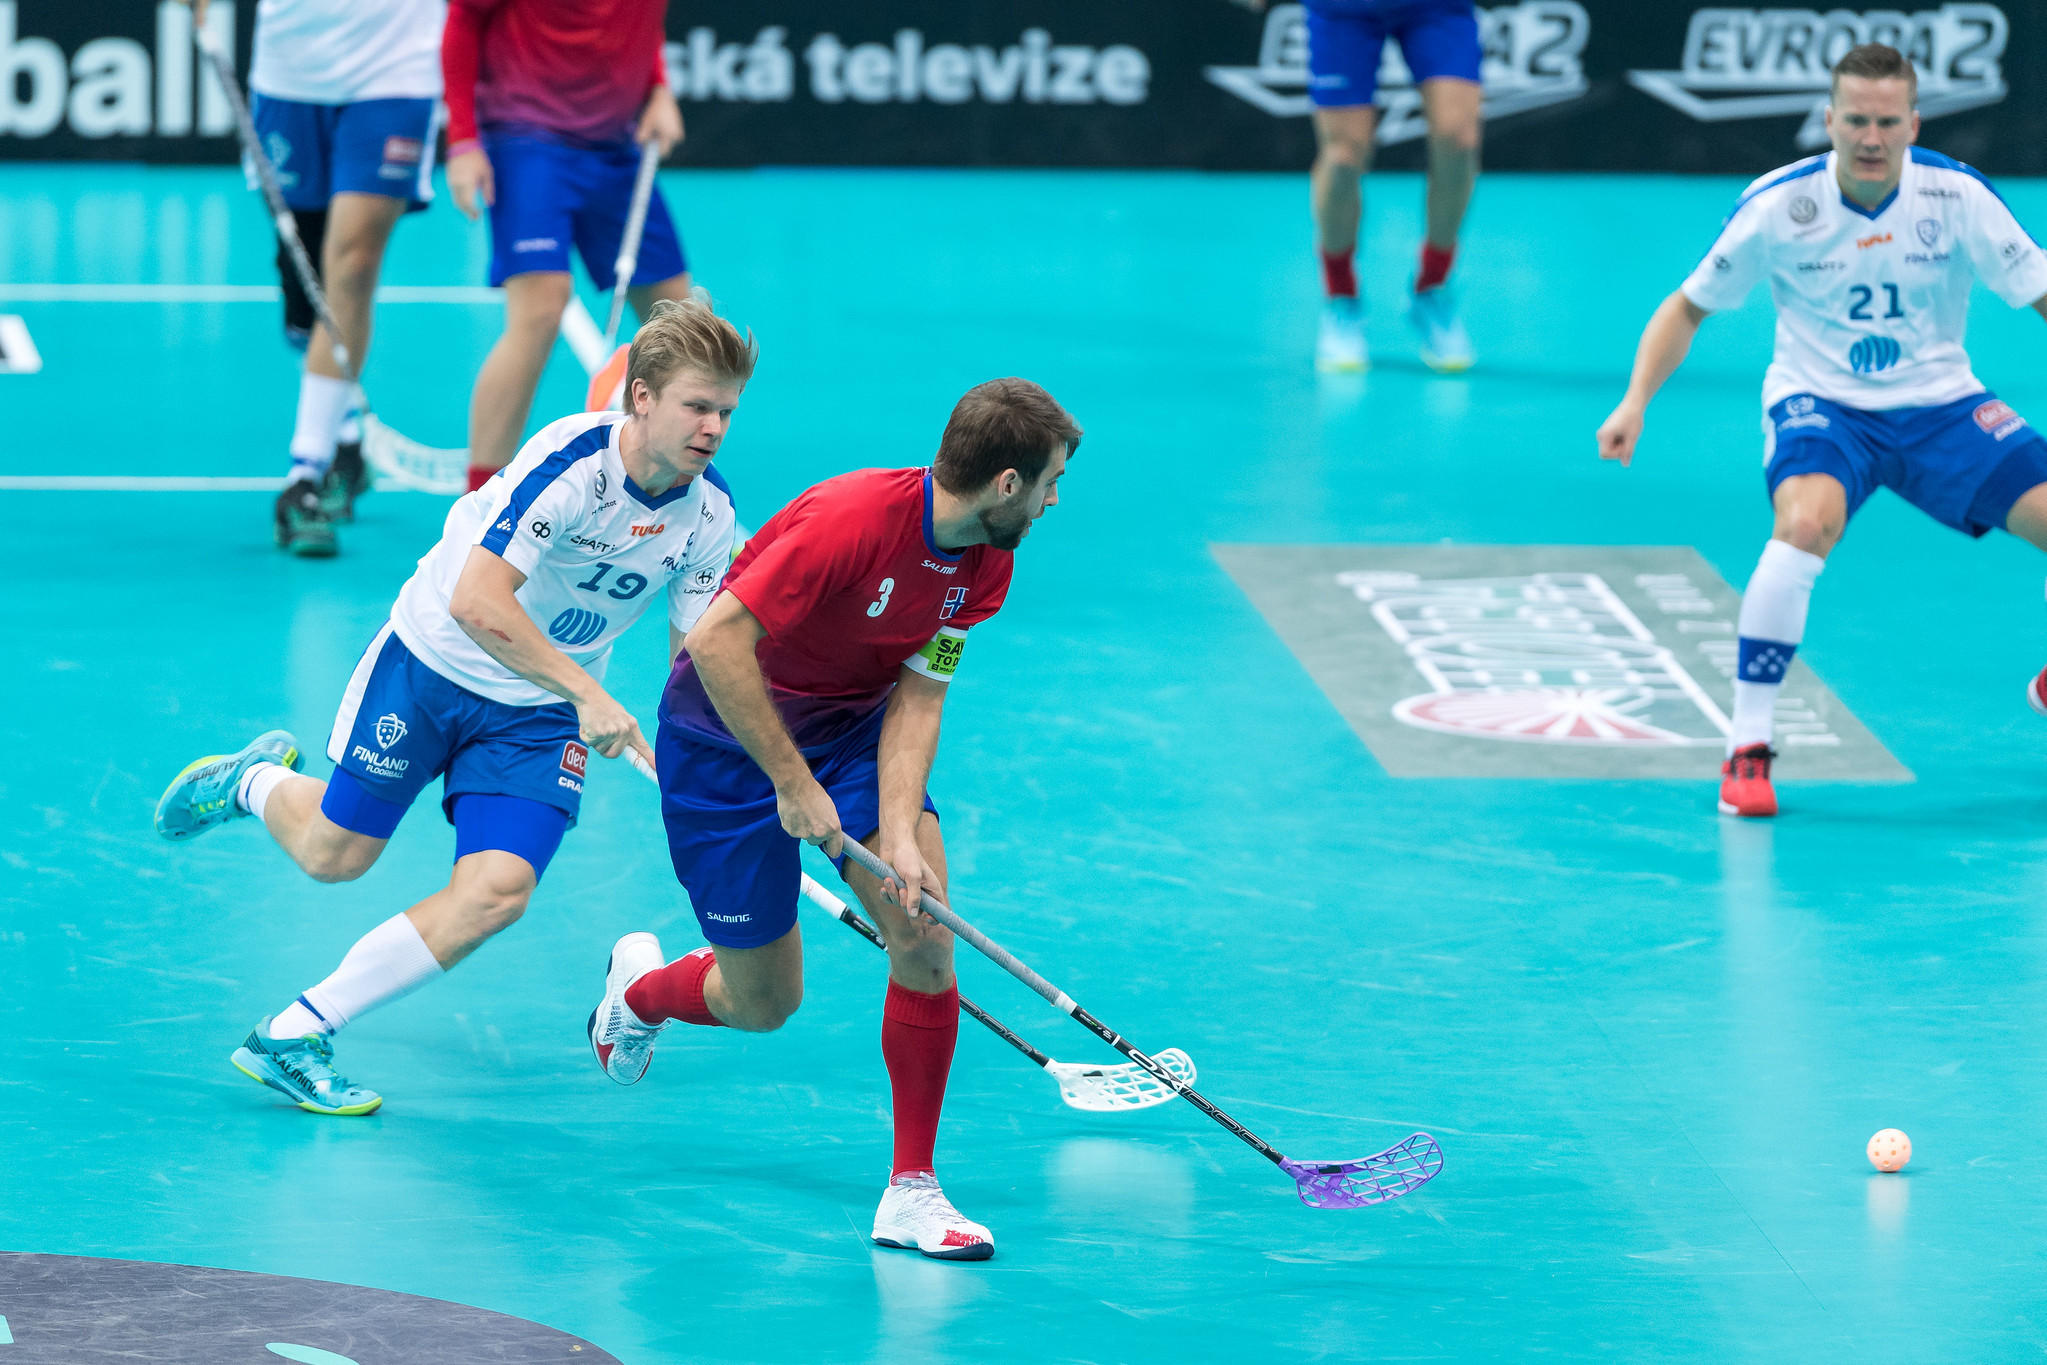 IFF to make decision on this years World Floorball Championship by October